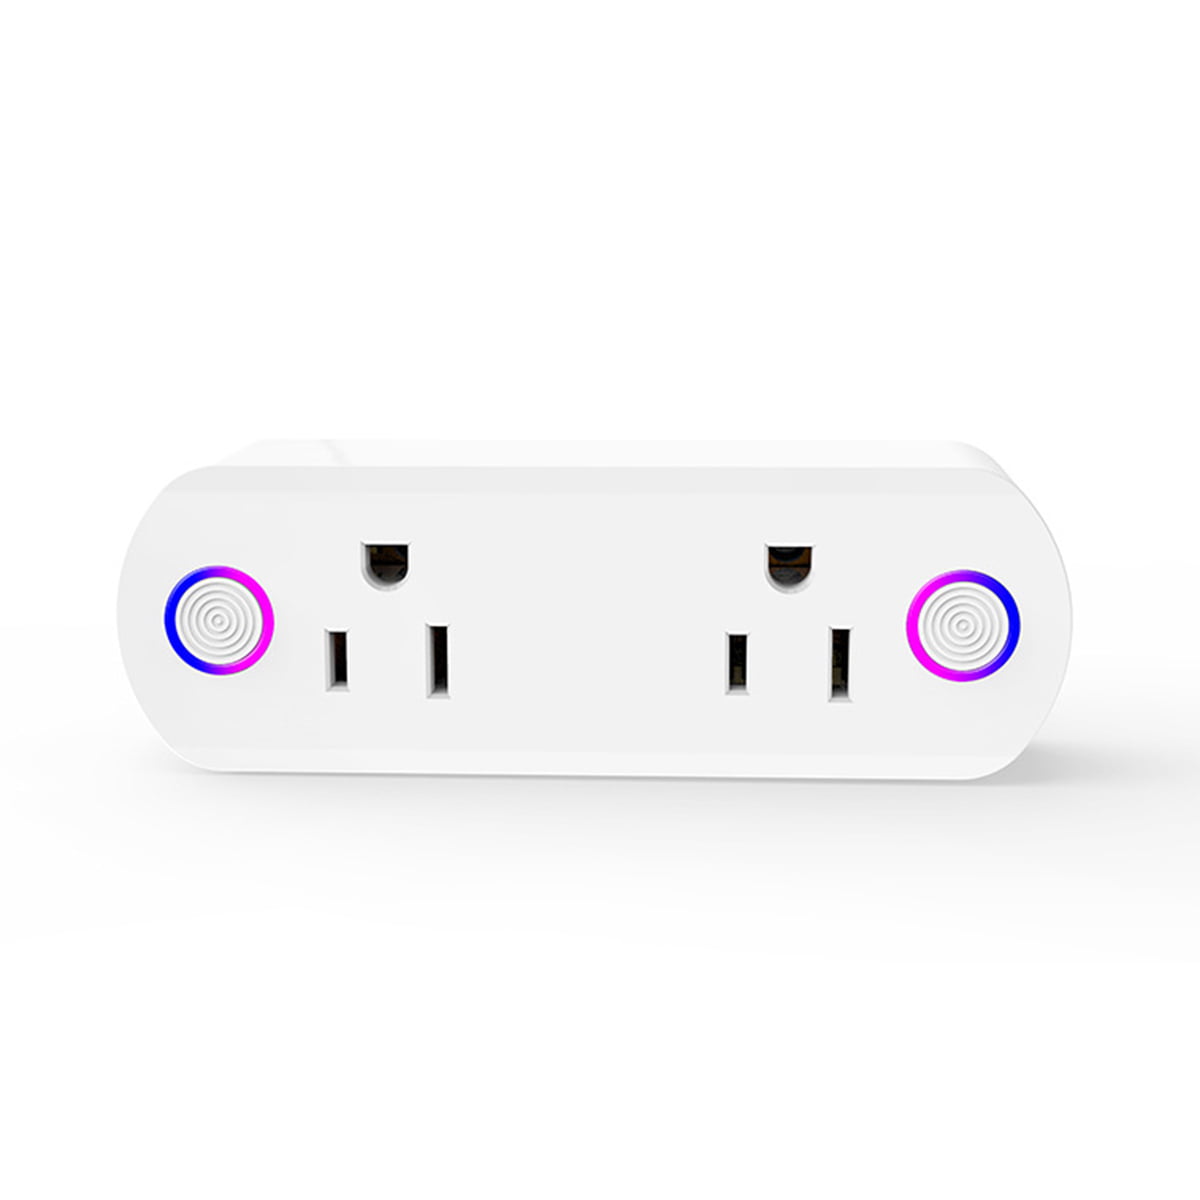 KMC Smart Plug Duo, 2-Outlet Wi-Fi Smart Plug, 2-Pack, Multi Plug Adapter,  Independently Controlled Smart Outlets, Works with Alexa & Google